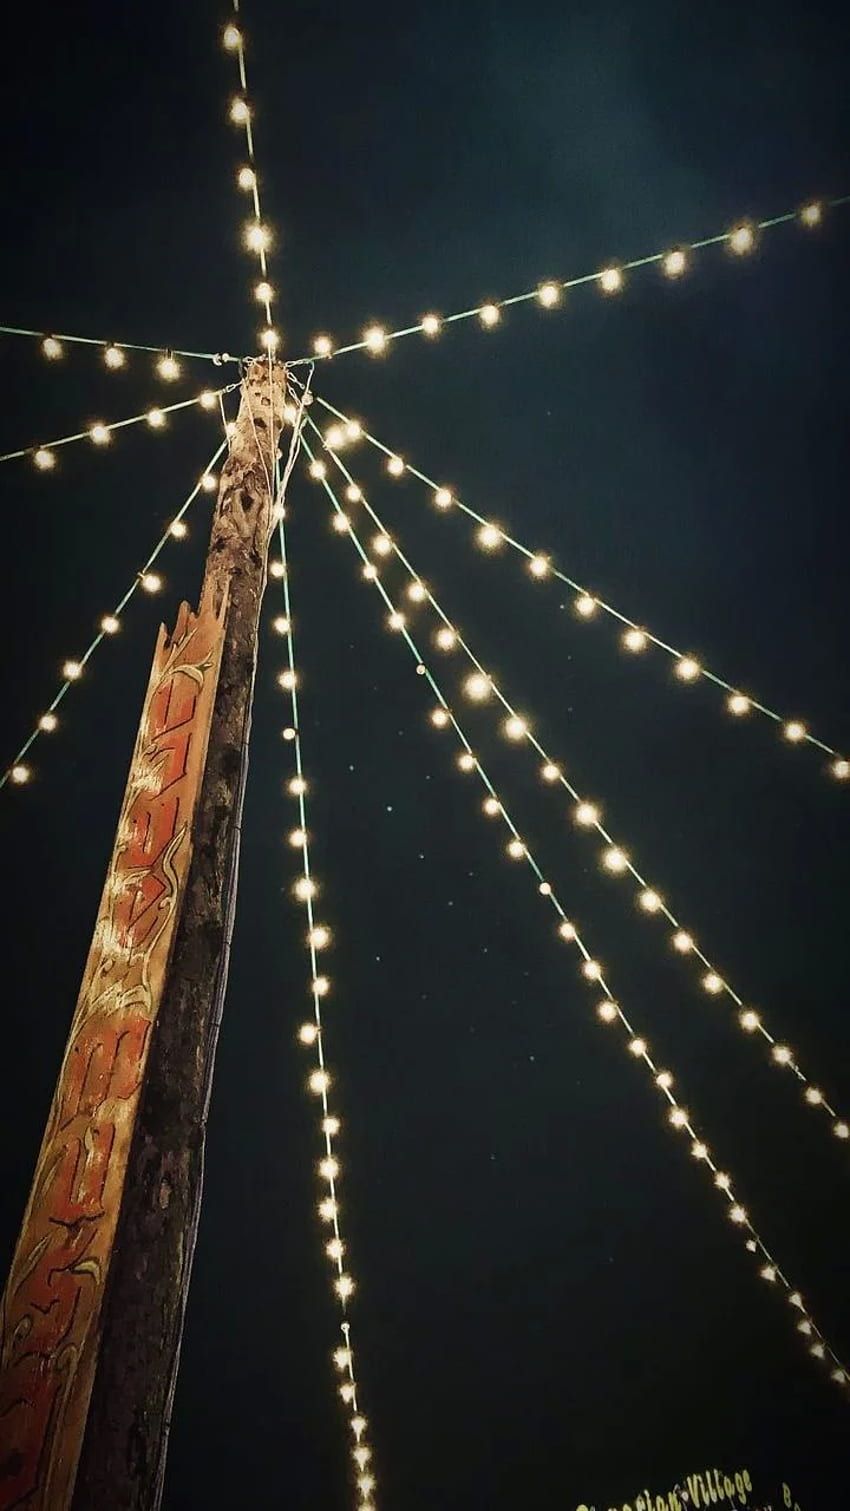 A pole with lights strung from it at night. - Fairy lights